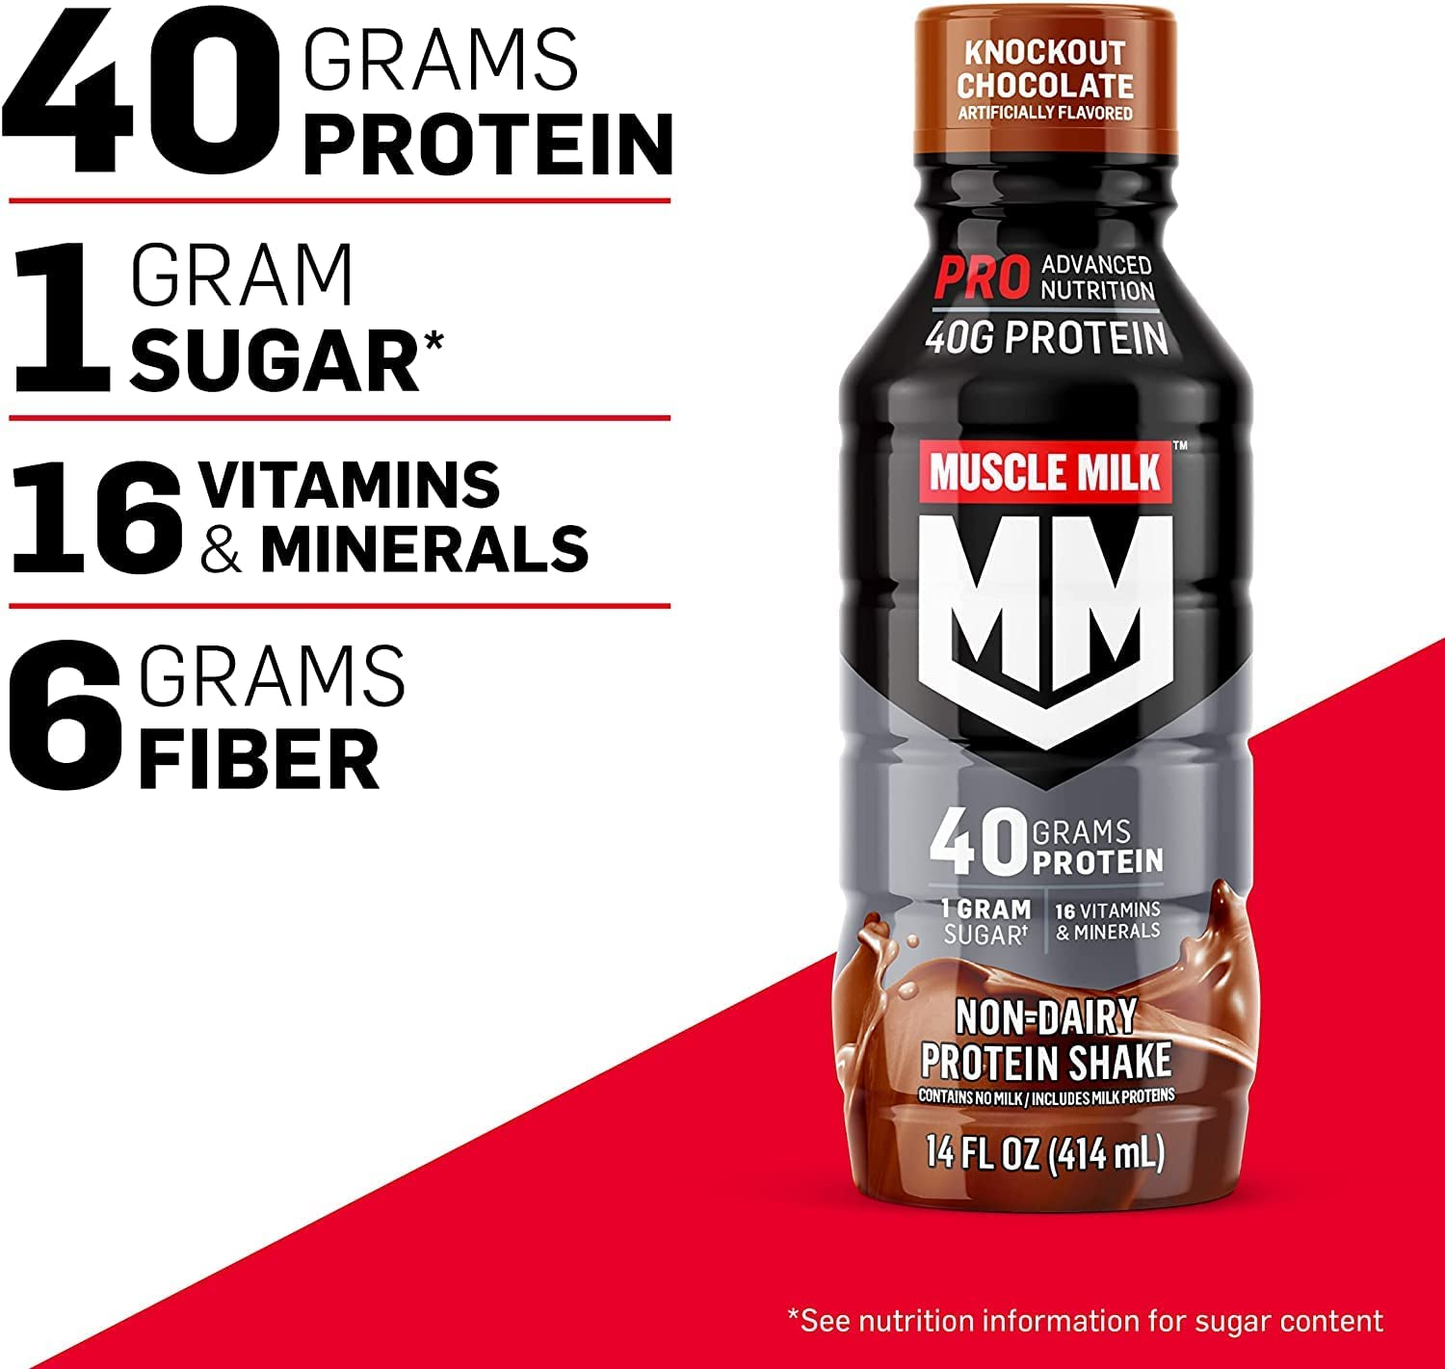 Muscle Milk Pro Advanced Nutrition Protein Shake, Knockout Chocolate, 14 Fl Oz Bottle, 12 Pack, 40G Protein, 1G Sugar, 16 Vitamins & Minerals, 6G Fiber, Workout Recovery, Packaging May Vary